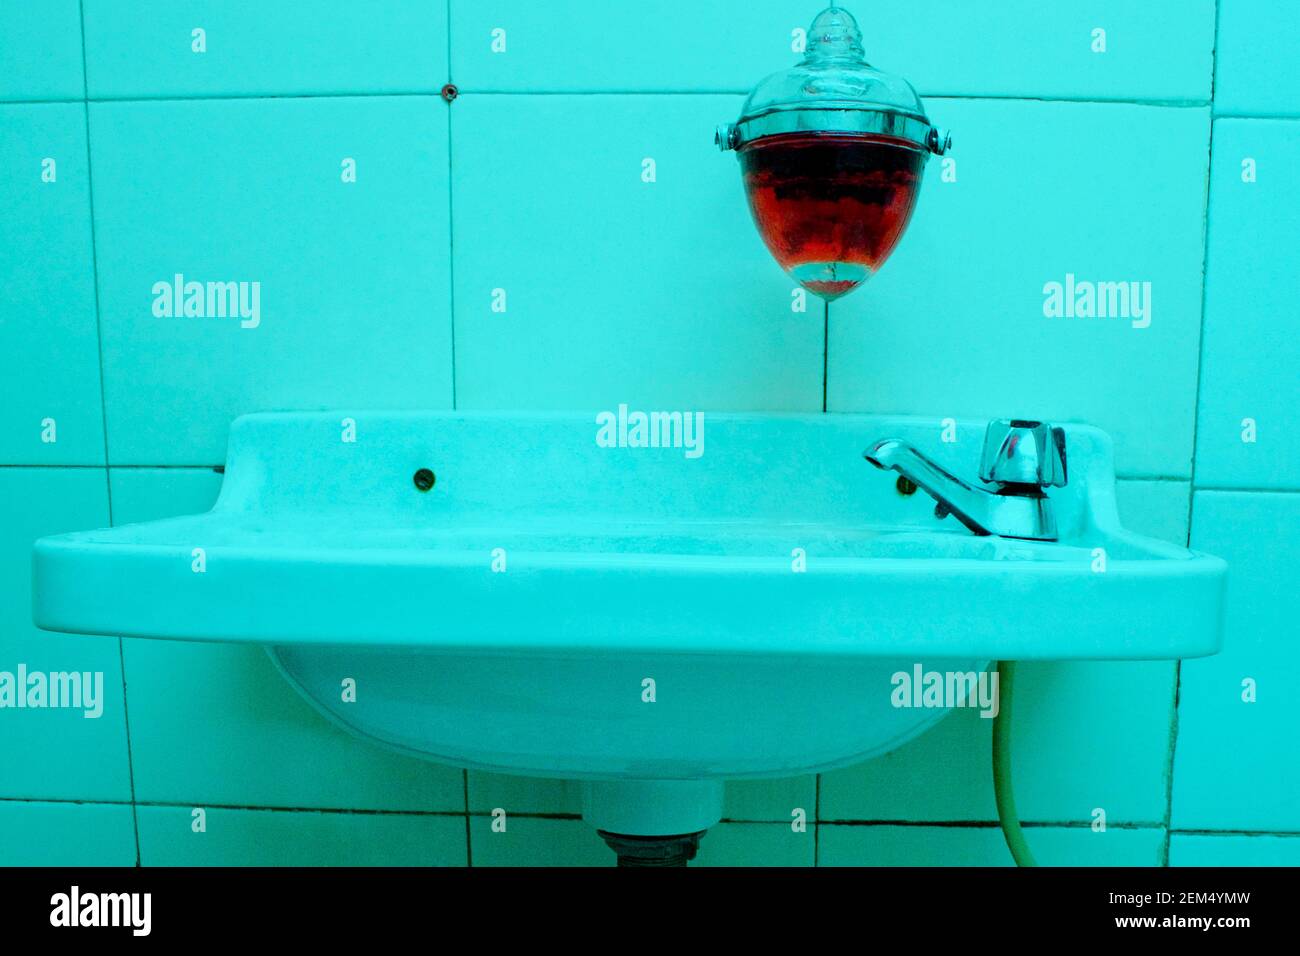 Close-up of a bathroom sink in the bathroom Stock Photo